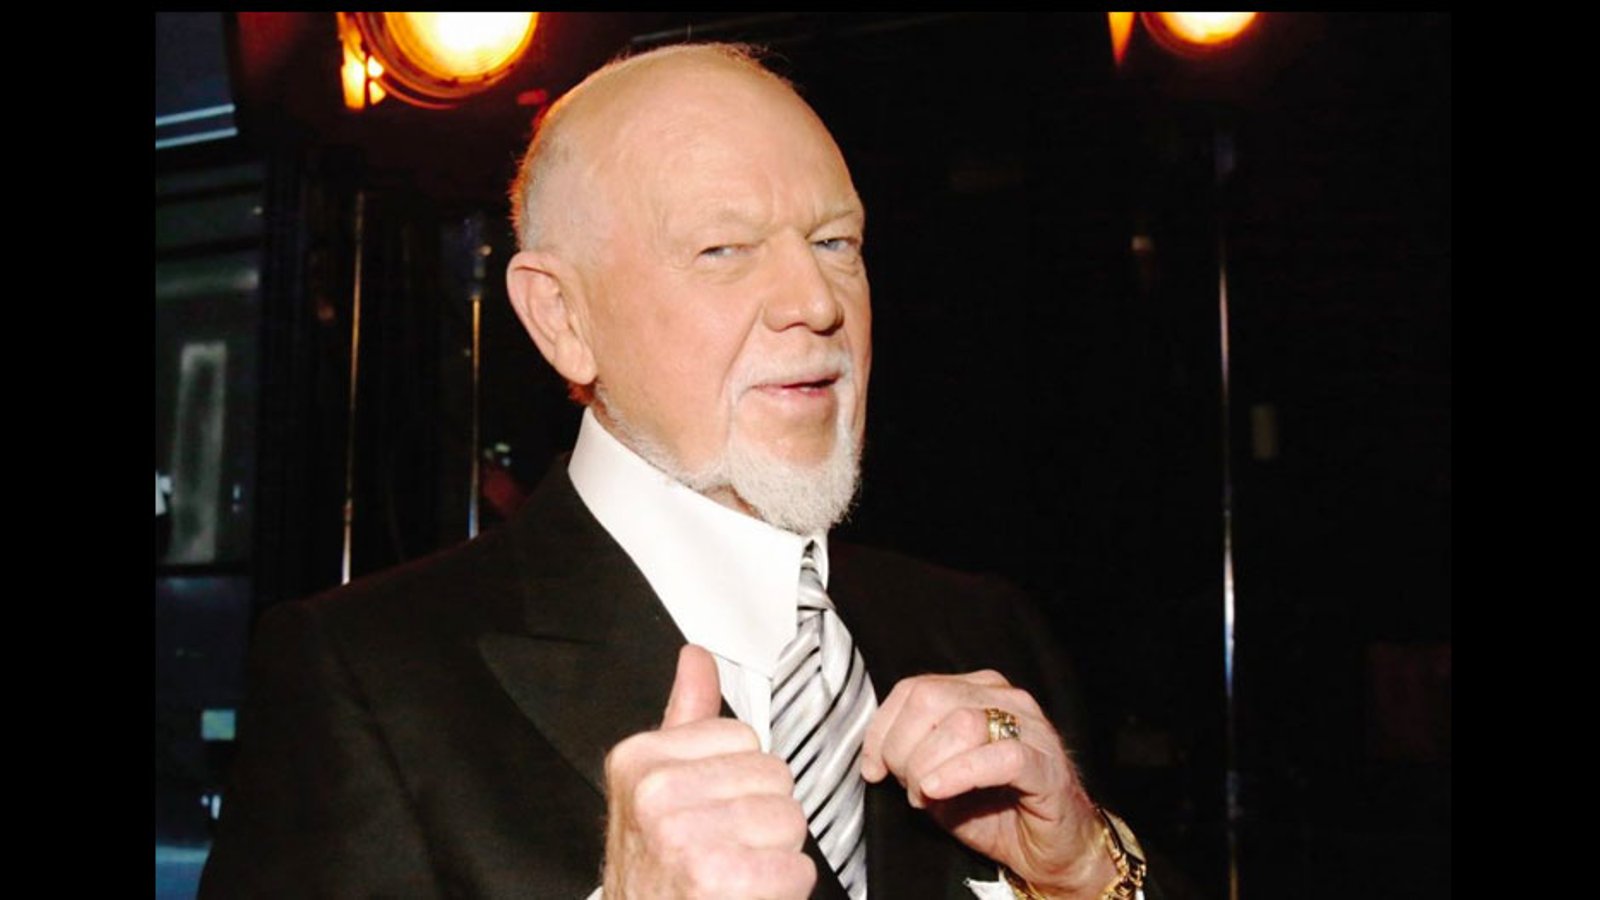 Don Cherry returns with revamped “Grapevine” show